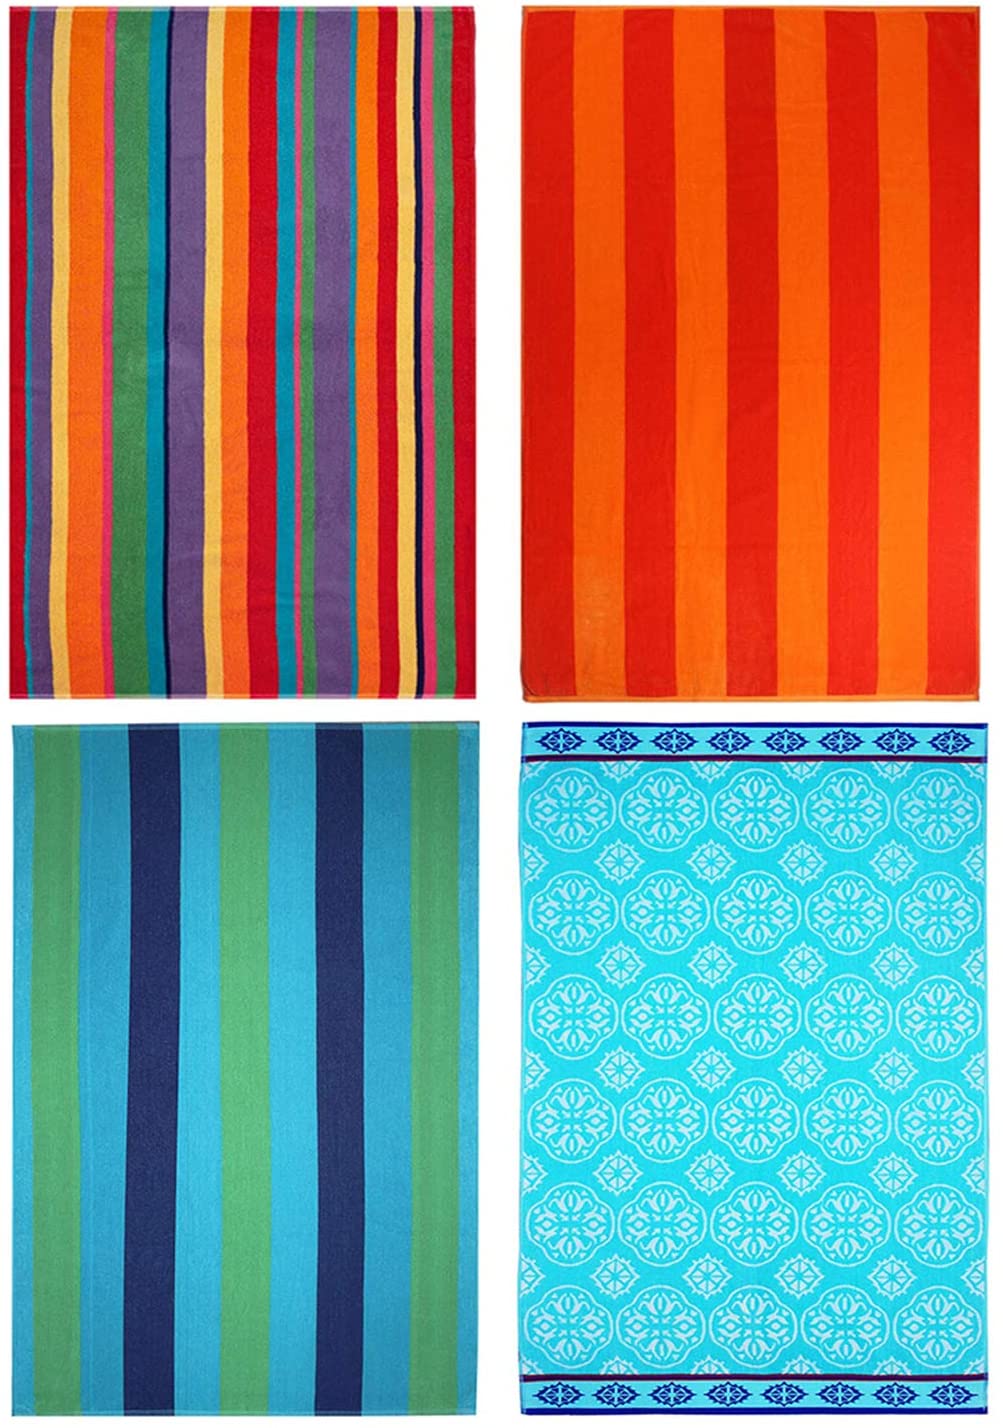 COTTON CRAFT Yarn Dyed Velour Beach Towels, 4-Pack